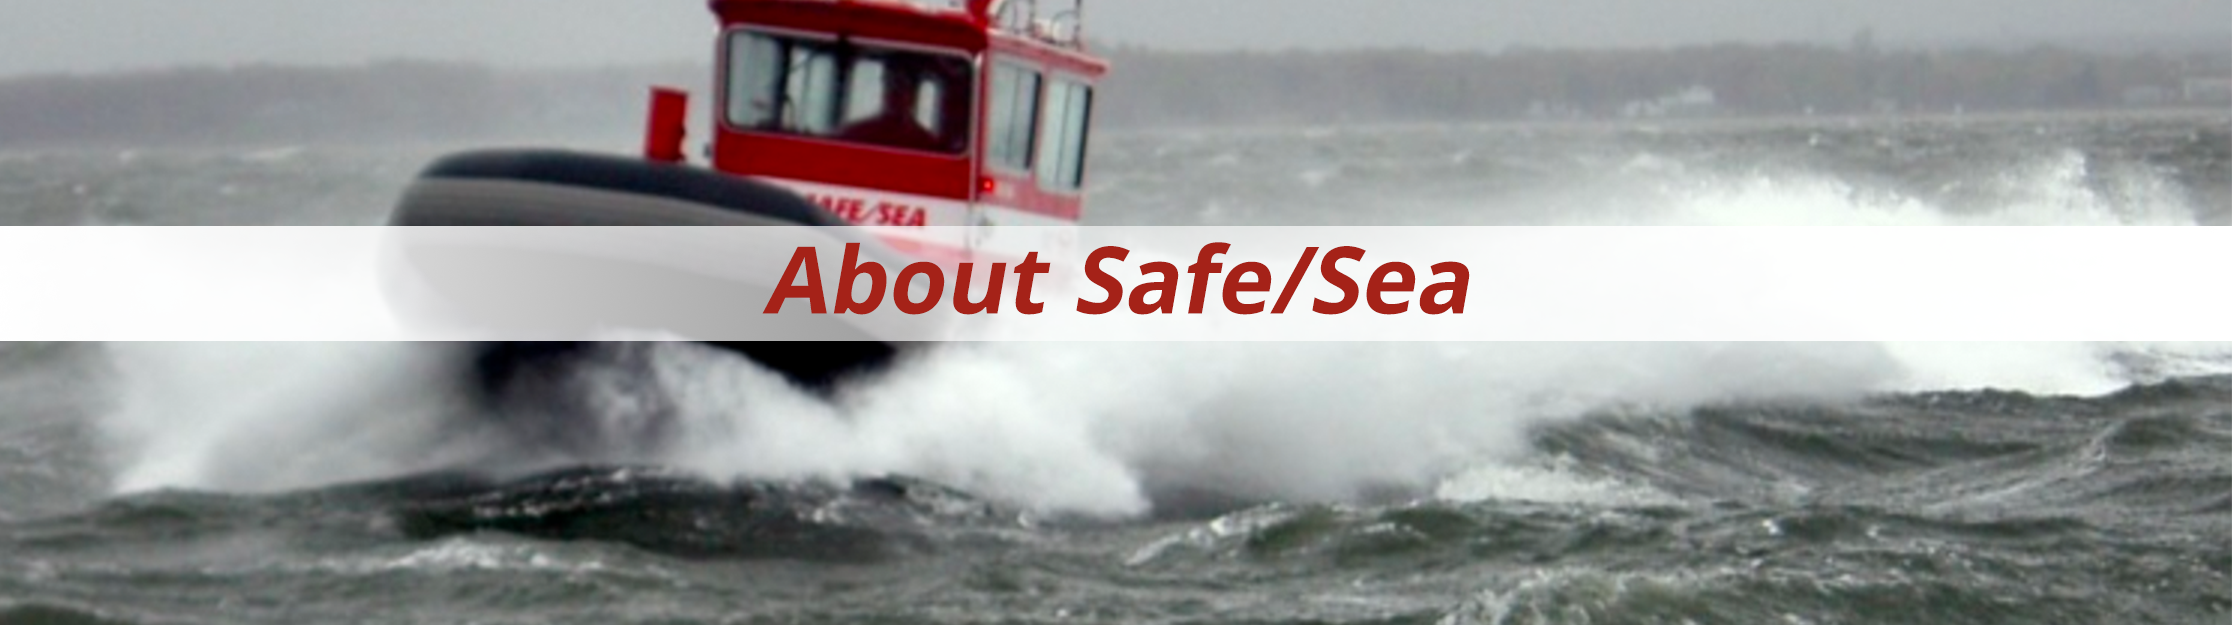 about_safesea_new2